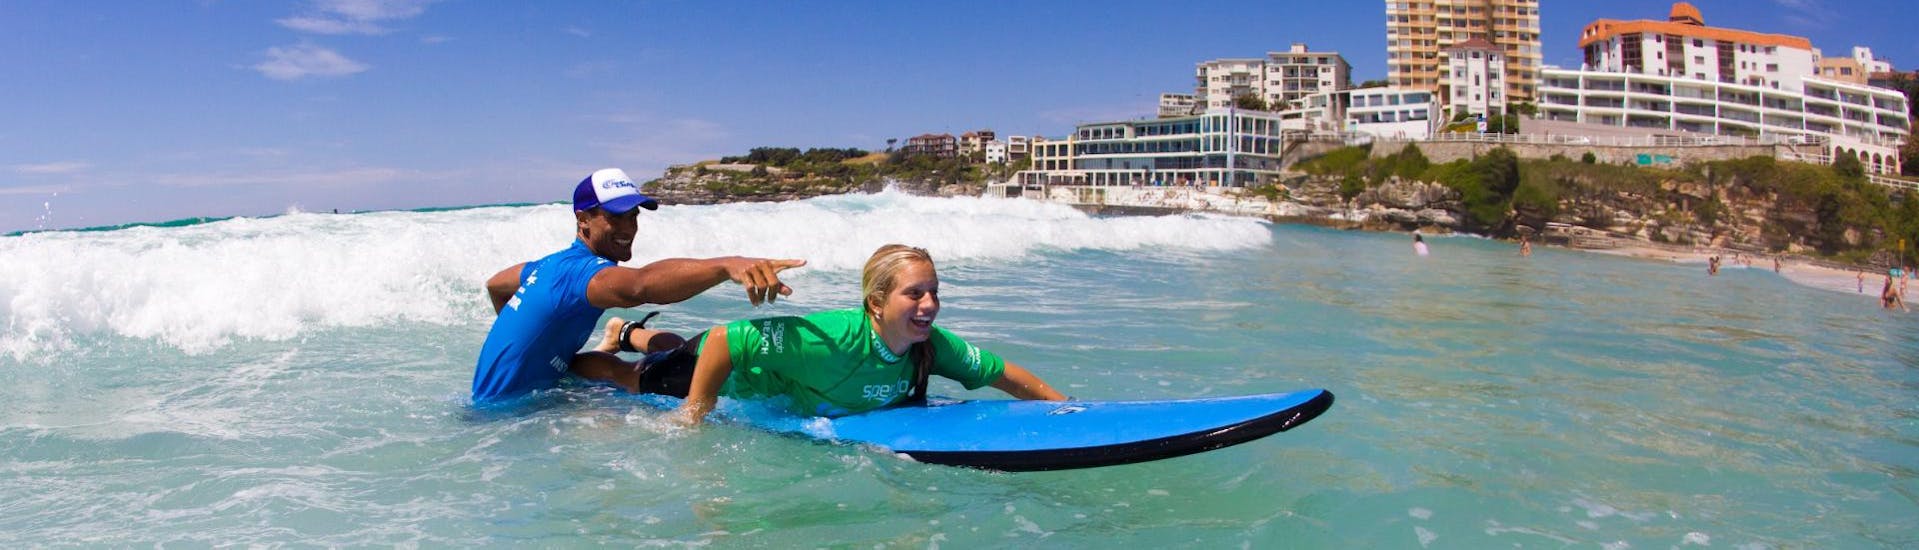 During the Surfing Lessons in Bondi Beach for Teens & Adults - Beginner, a young woman is having great time whilst learning how to surf under the guidance of an experienced surf instructor from Let’s Go Surfing.